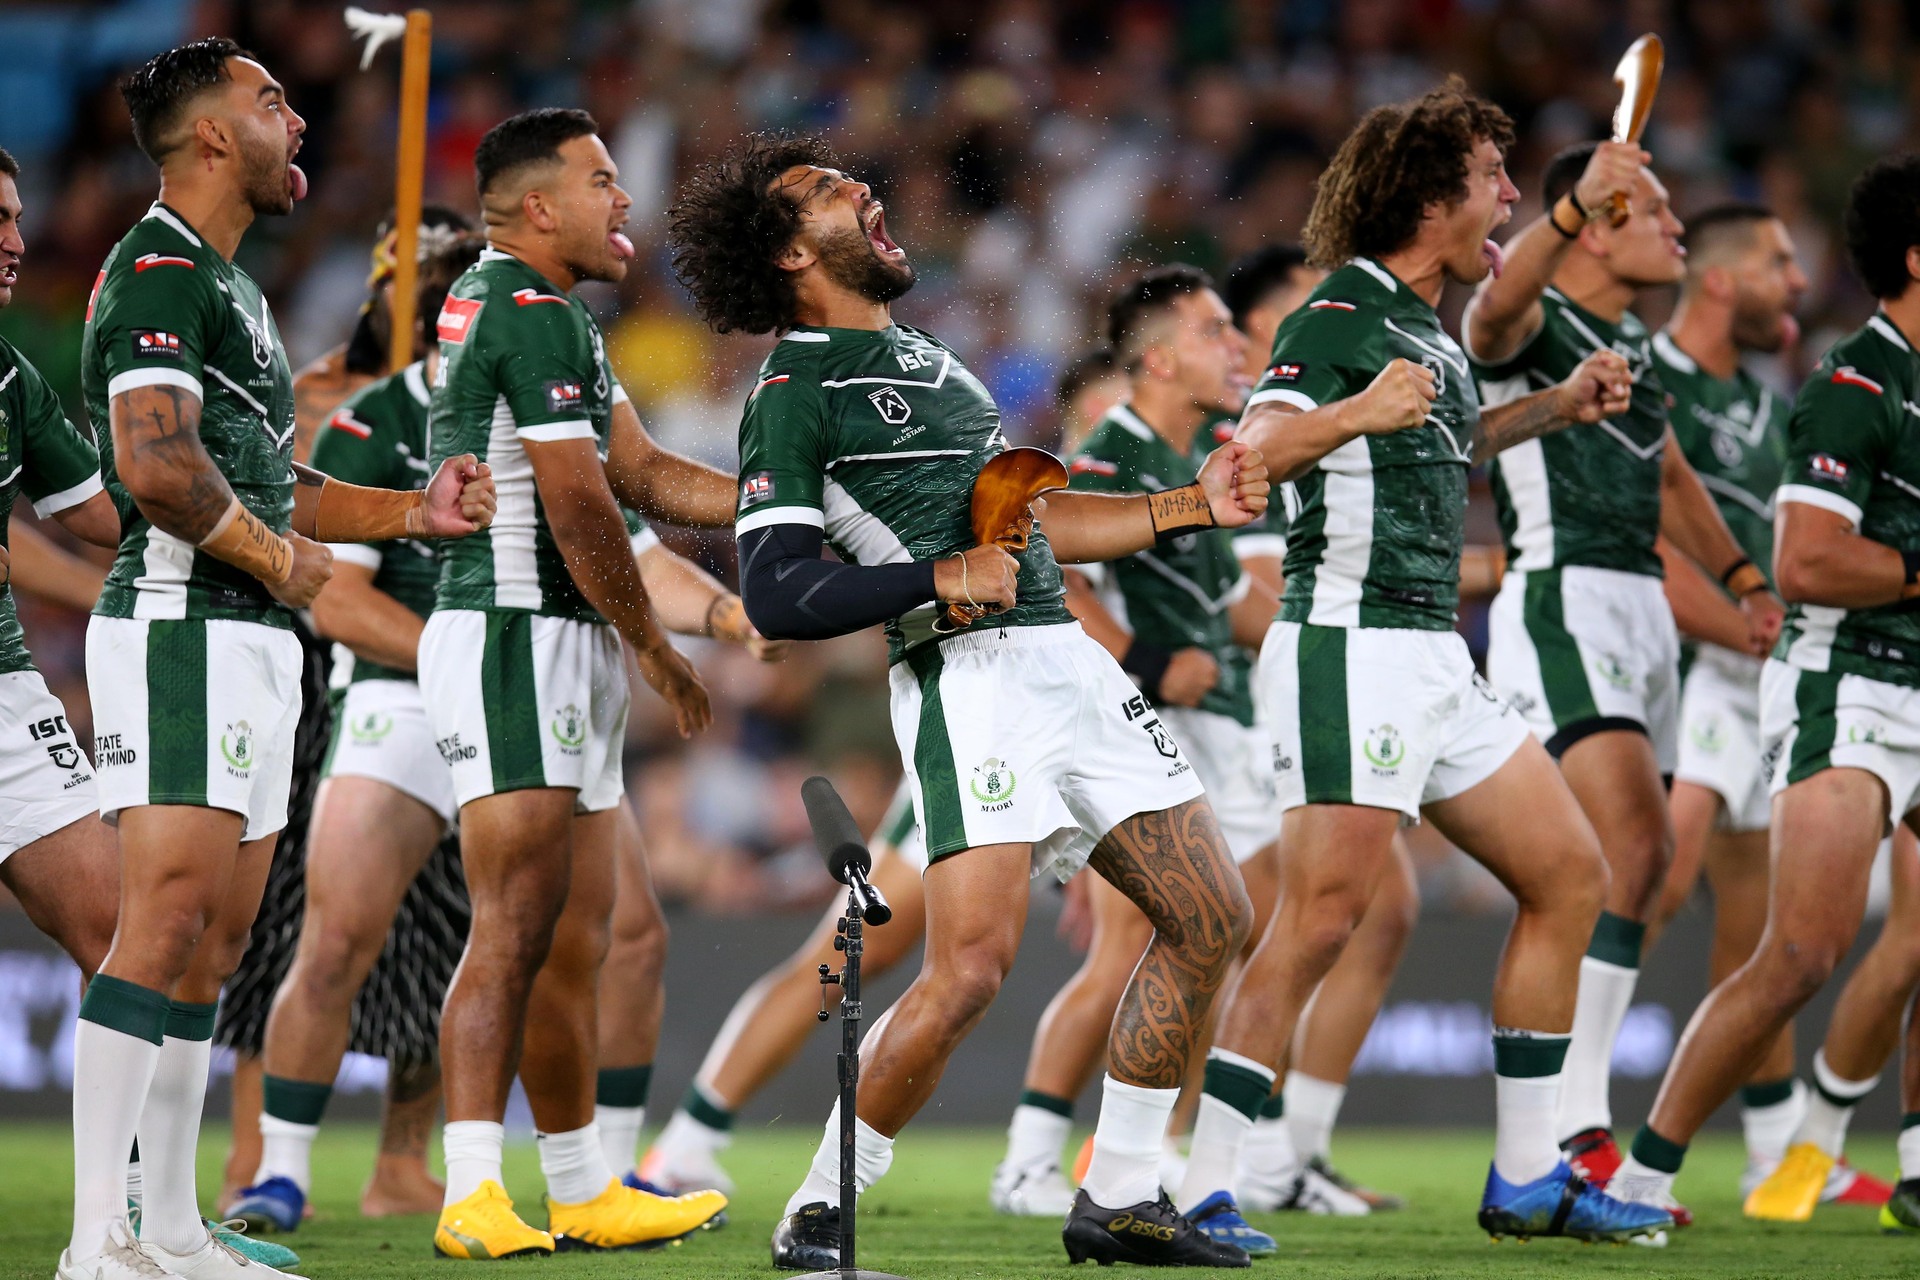 NRL All Stars Māori v Indigenous match to be played in Rotorua in 2023